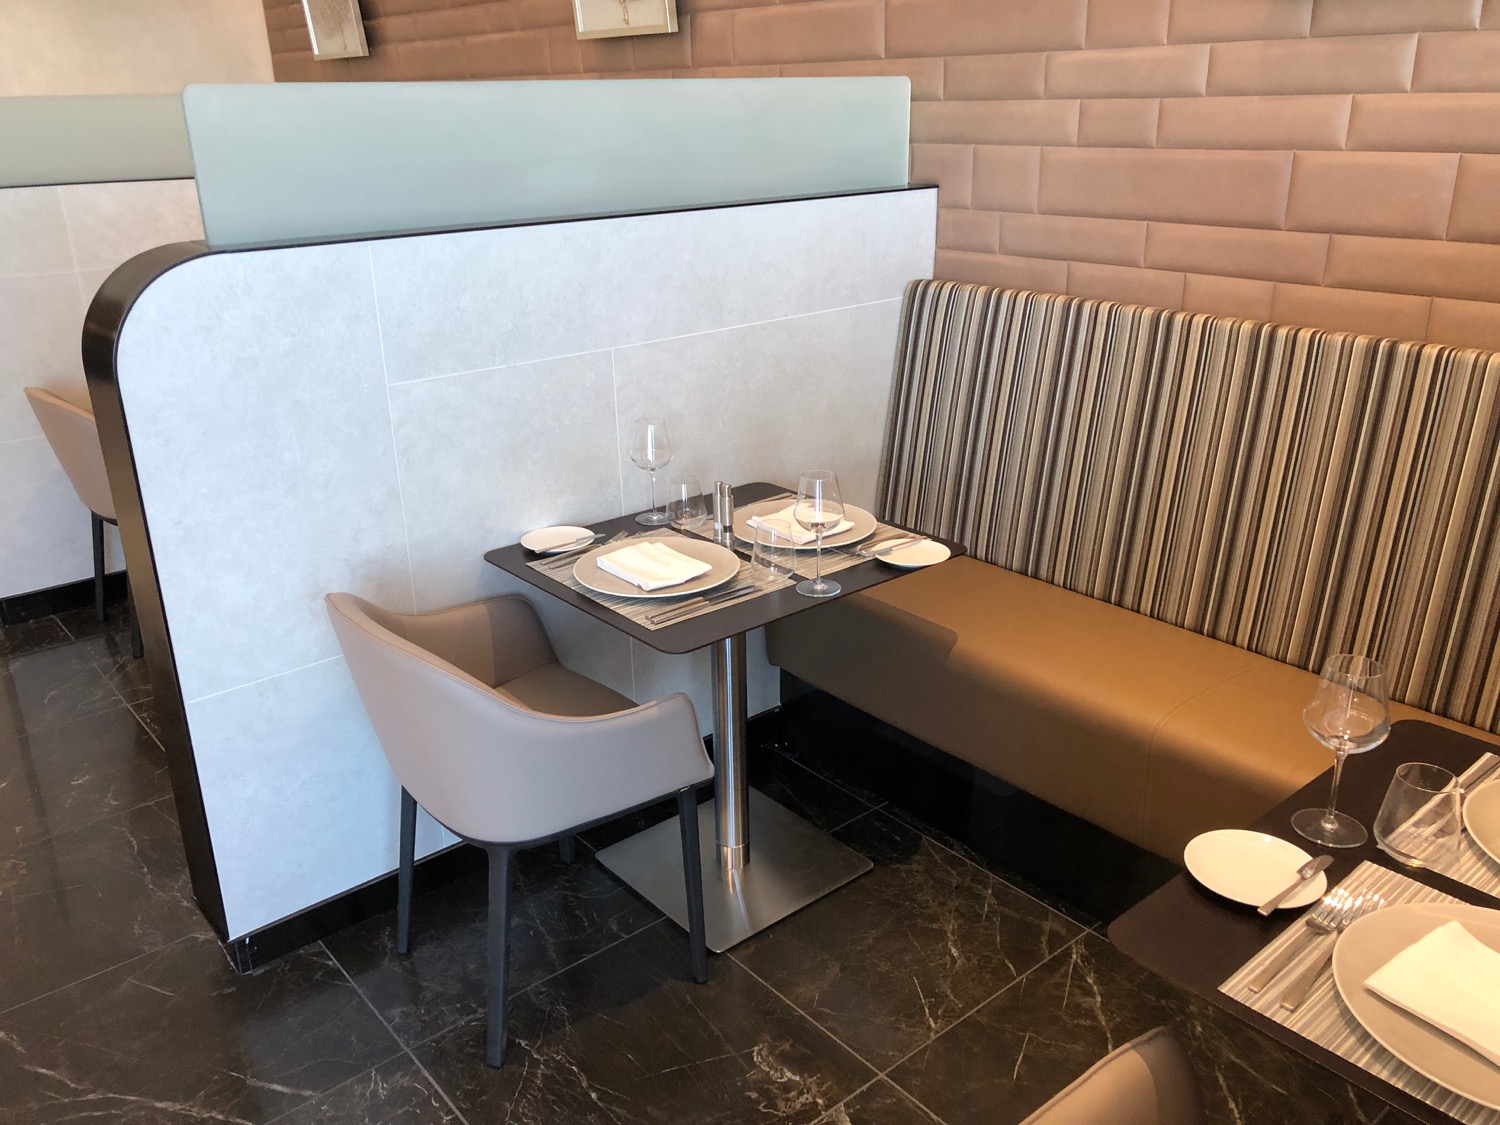 a table with plates and chairs in a restaurant